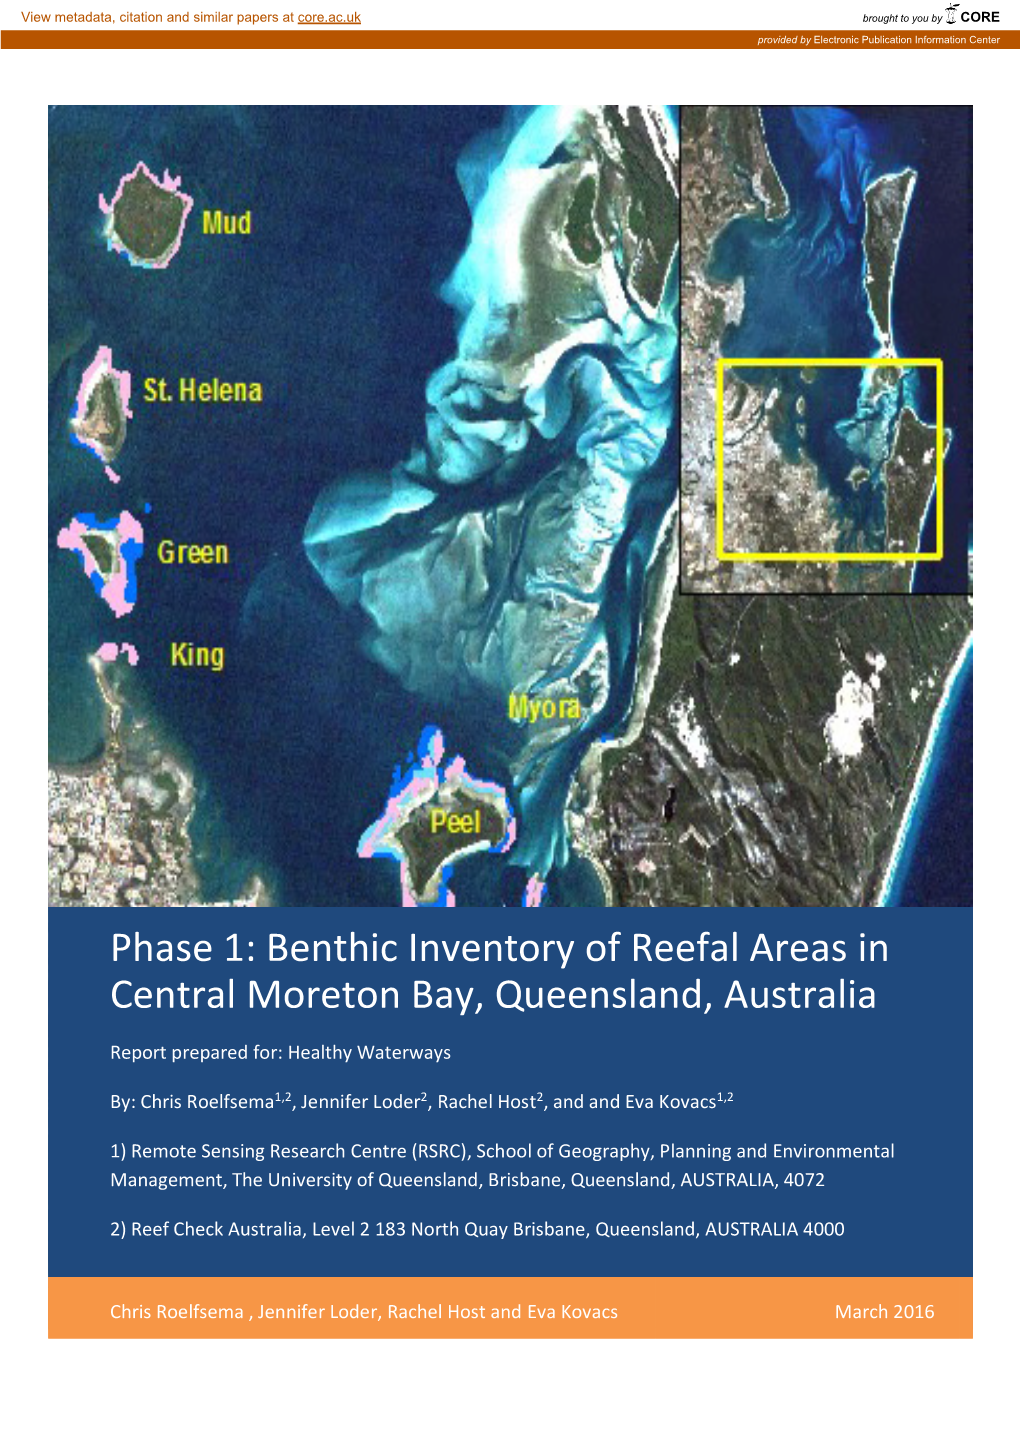 Benthic Inventory of Reefal Areas in Central Moreton Bay, Queensland, Australia